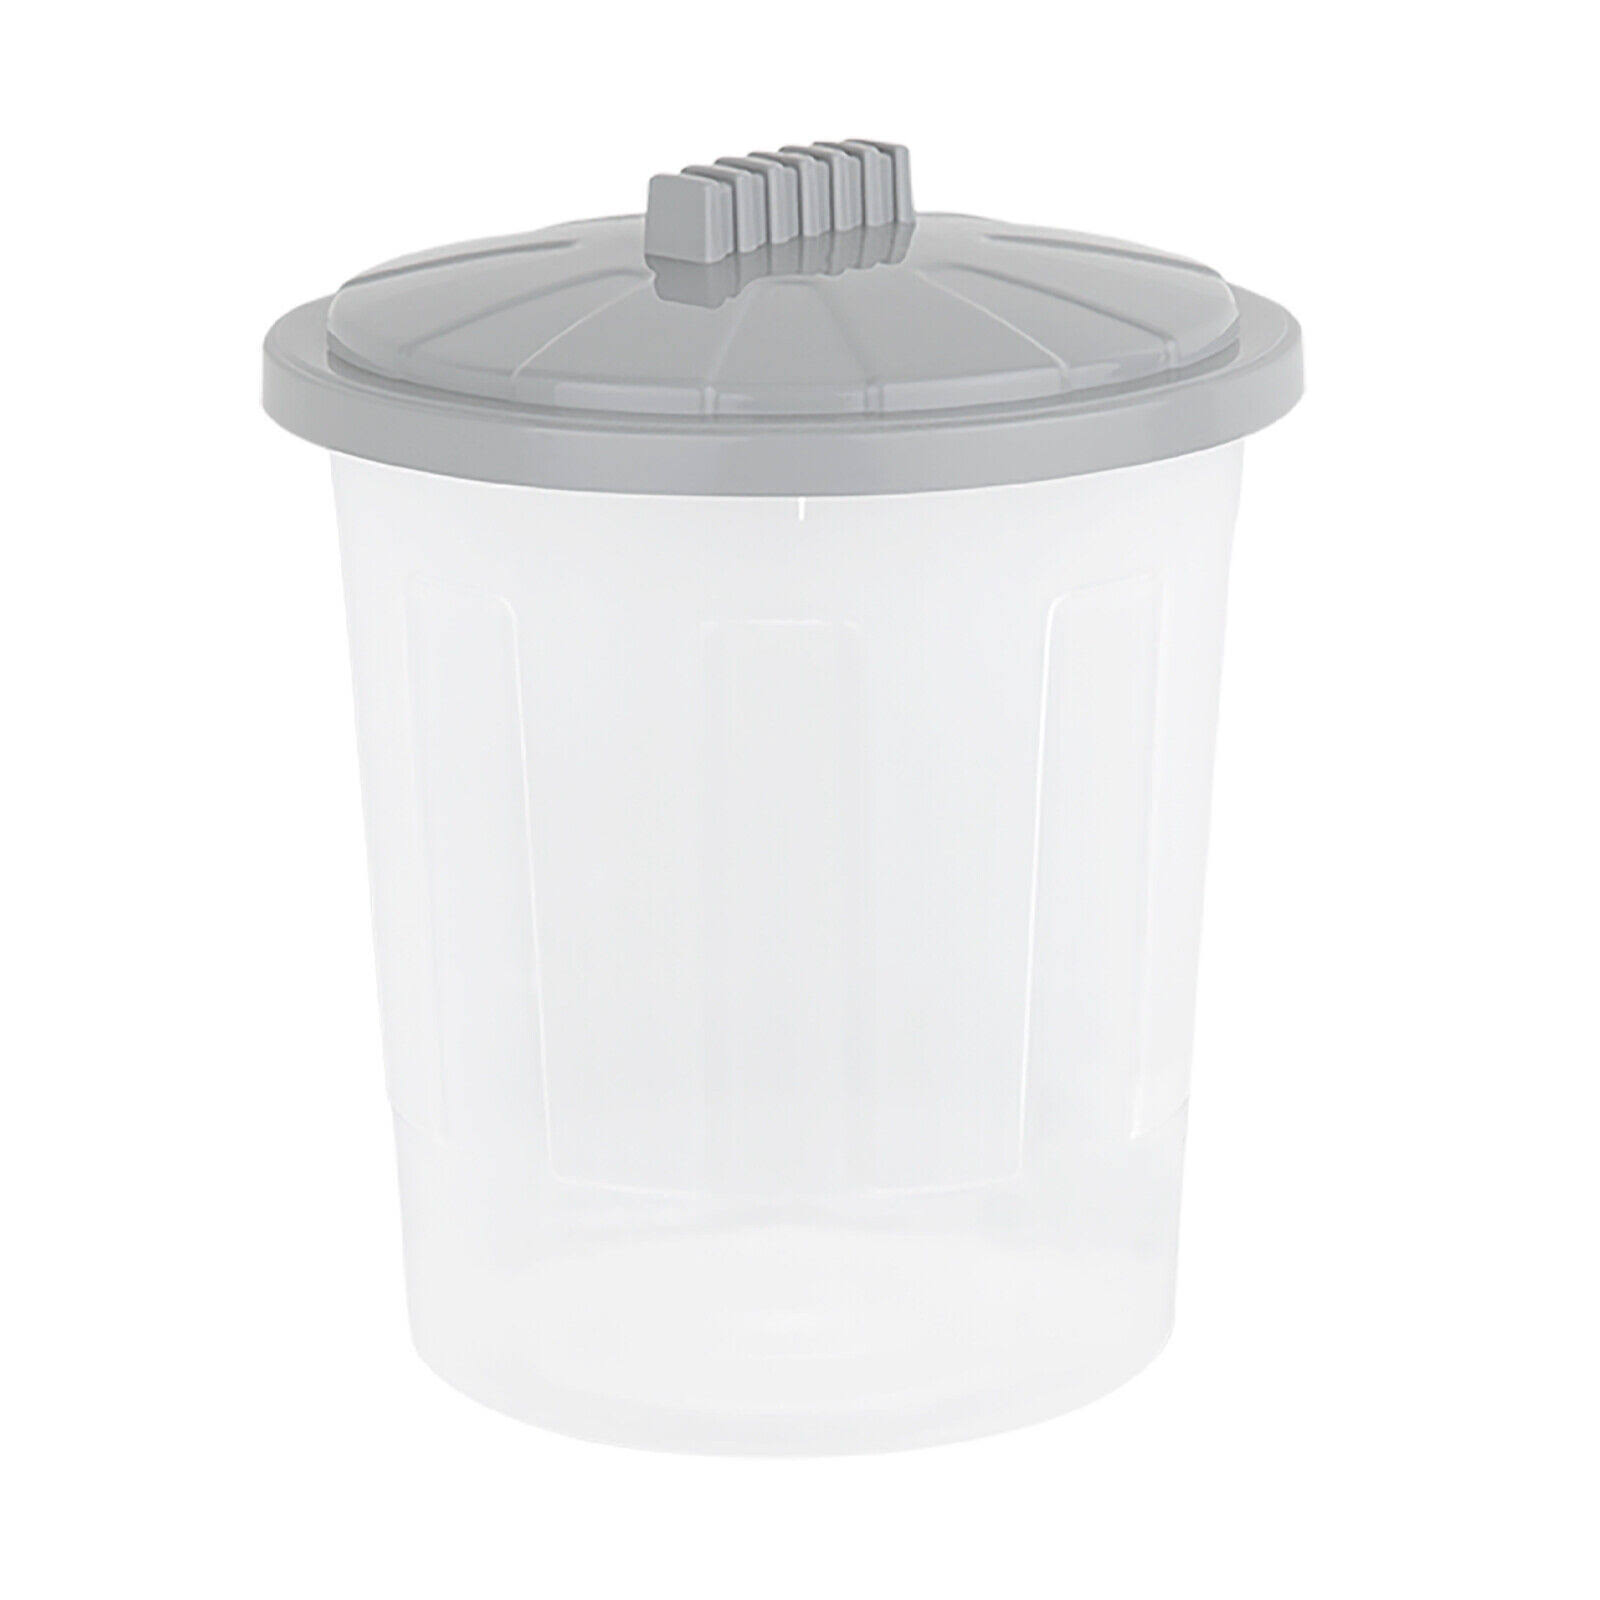 21L Clear Food Grade Plastic Bin with Twist Lock Lid Home Toy Storage Container